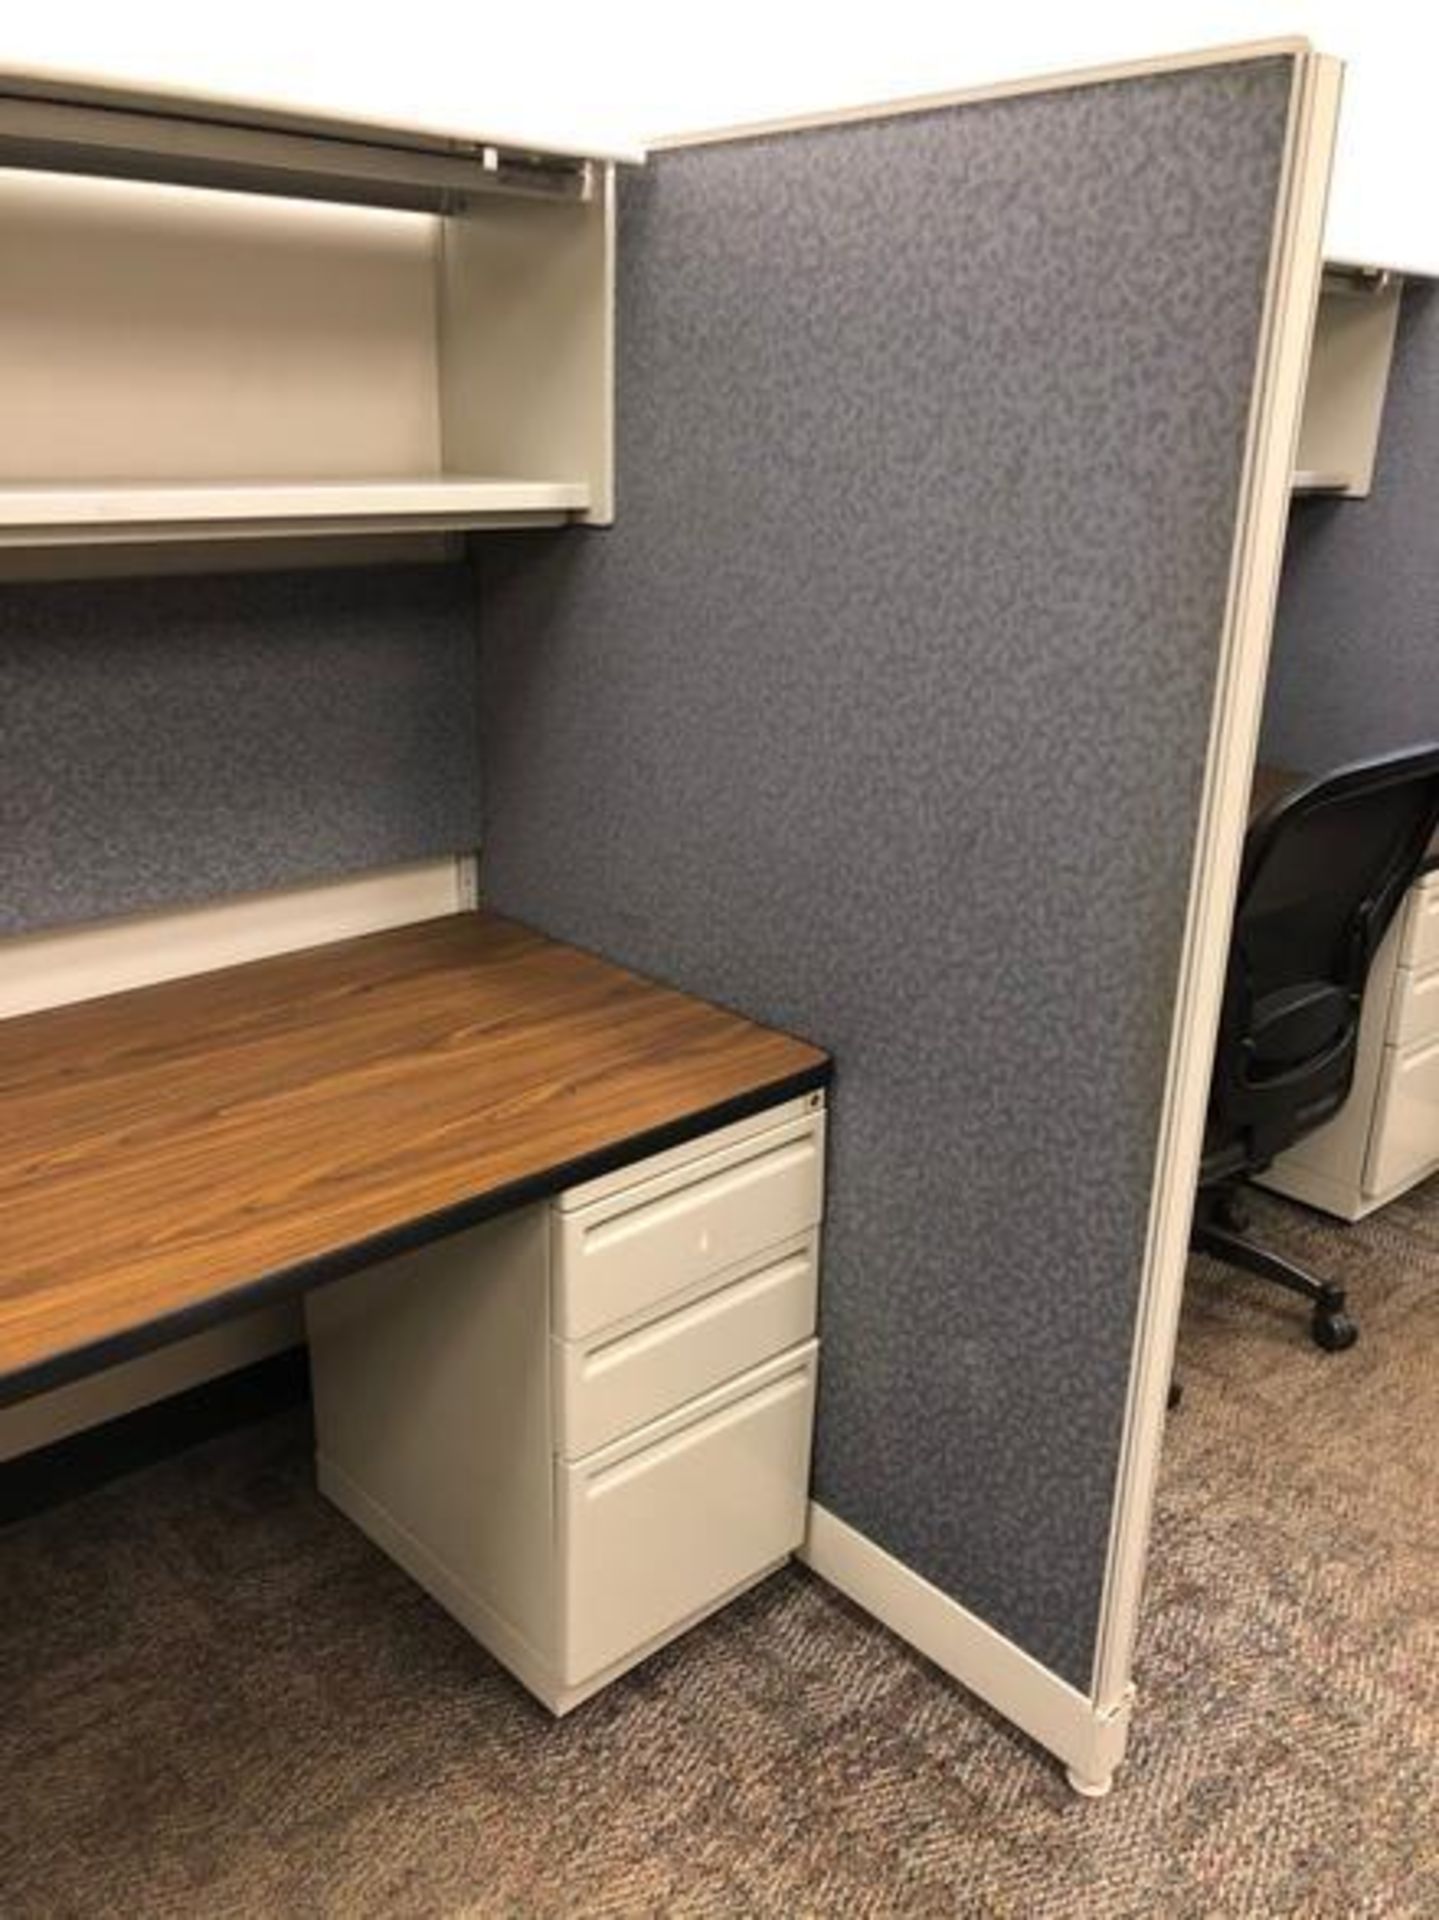 Work Station c/o: (3) Wood Laminate Tables, Size 29" x 72, 3 Cubic Dividers Panel Size 48" x 68", (3 - Image 6 of 13